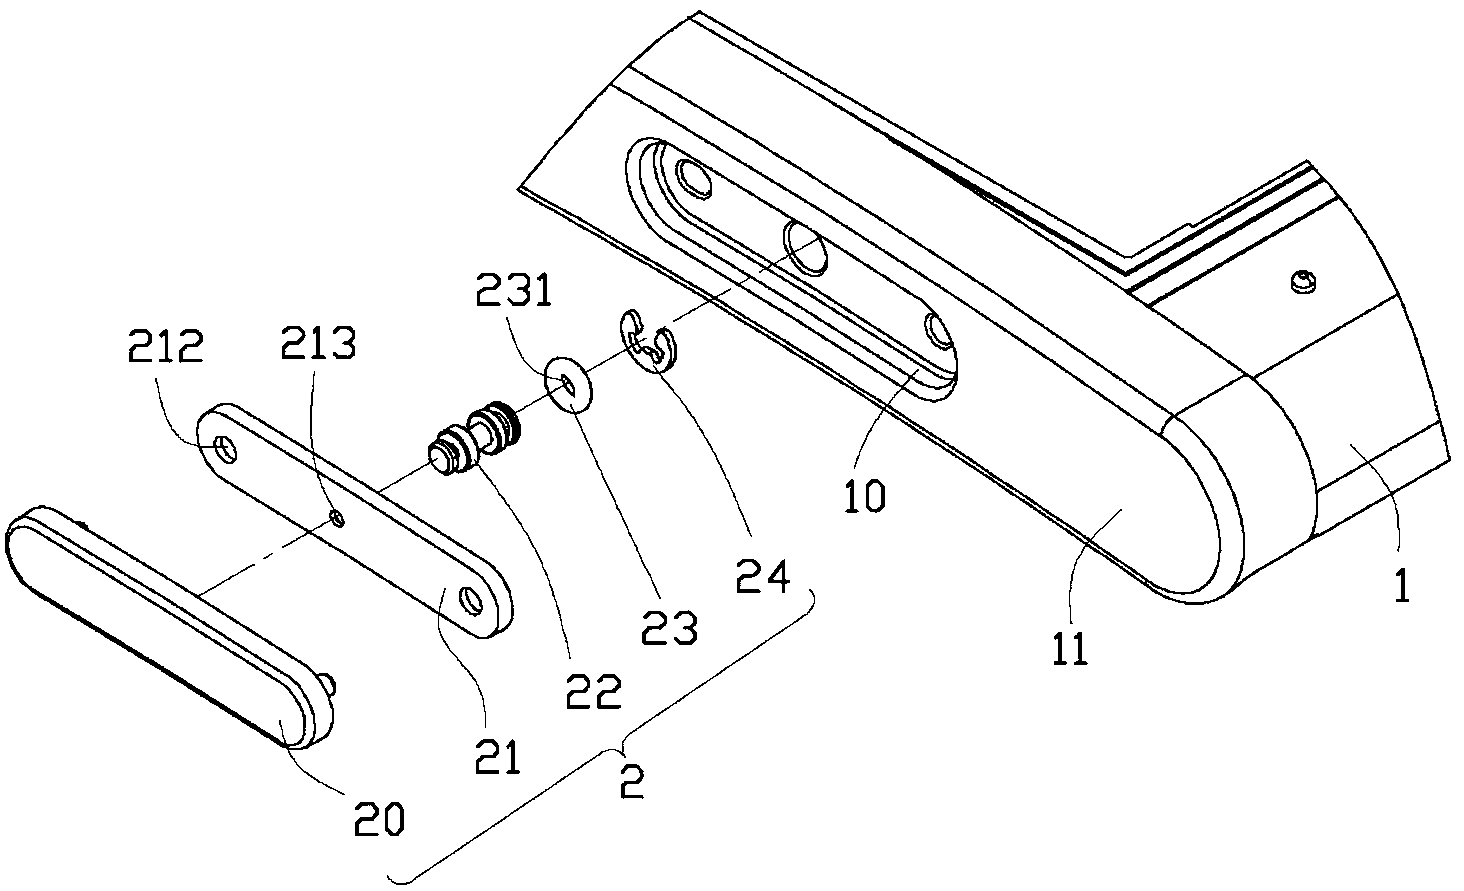 Press key and electronic device with same